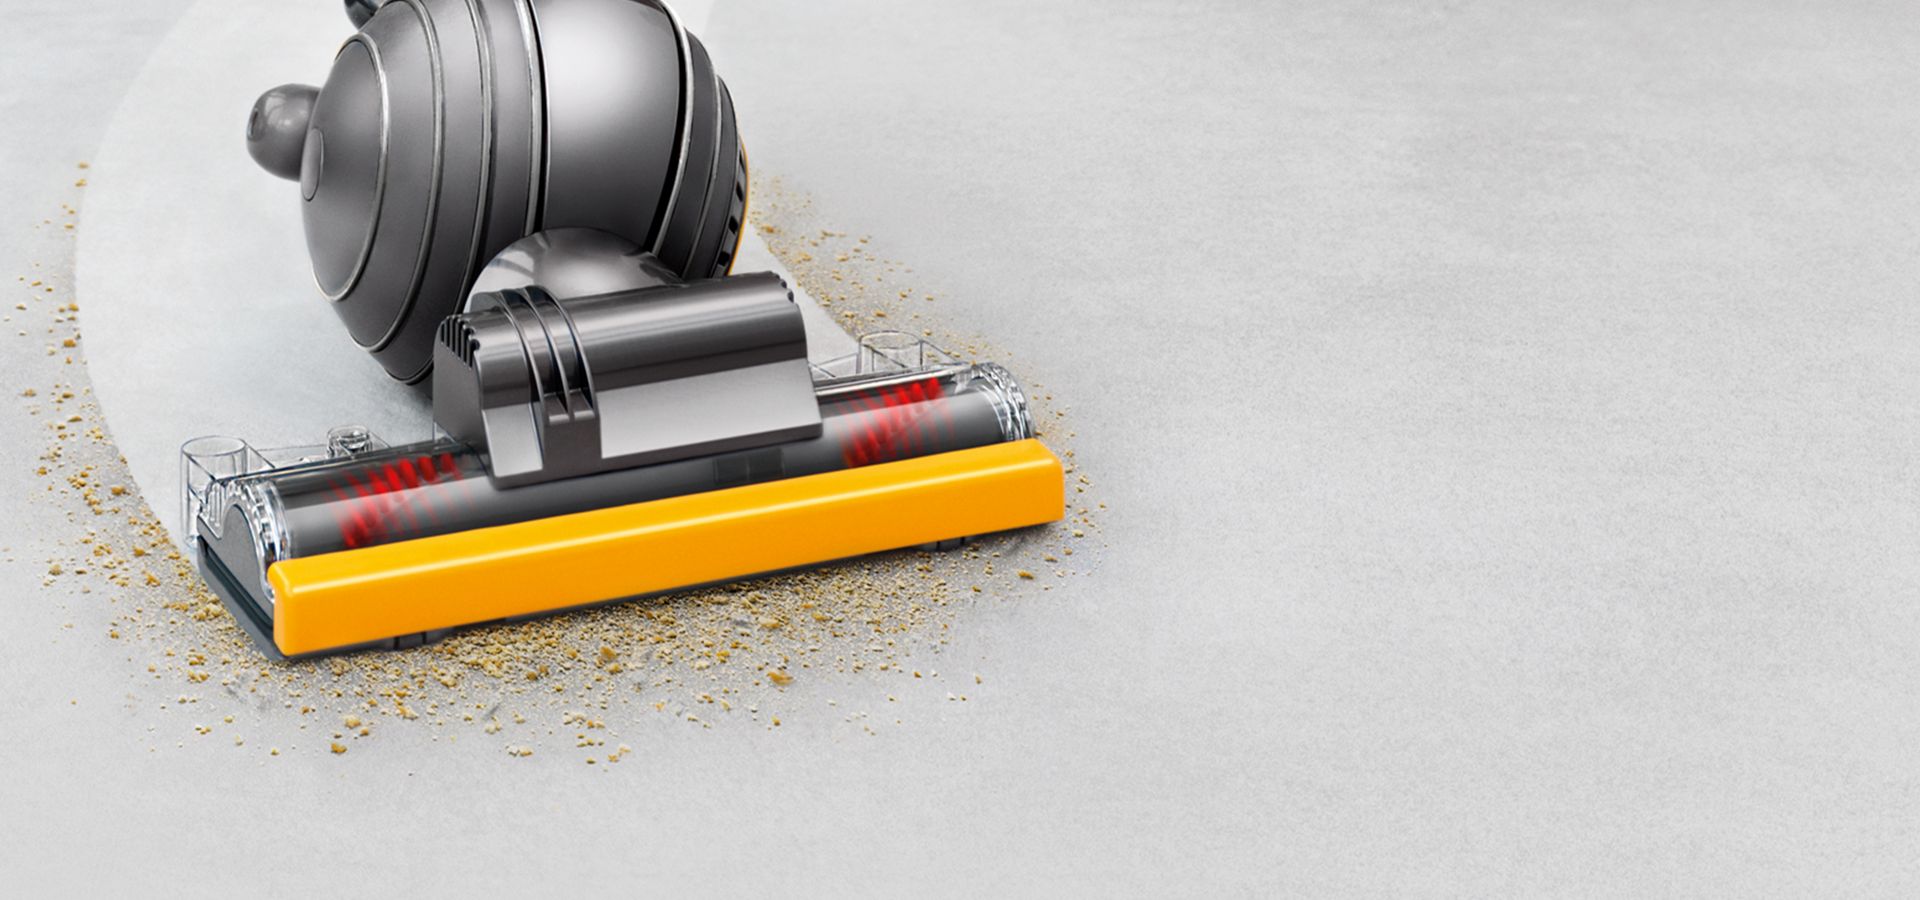 Dyson upright vacuum cleaner on carpet